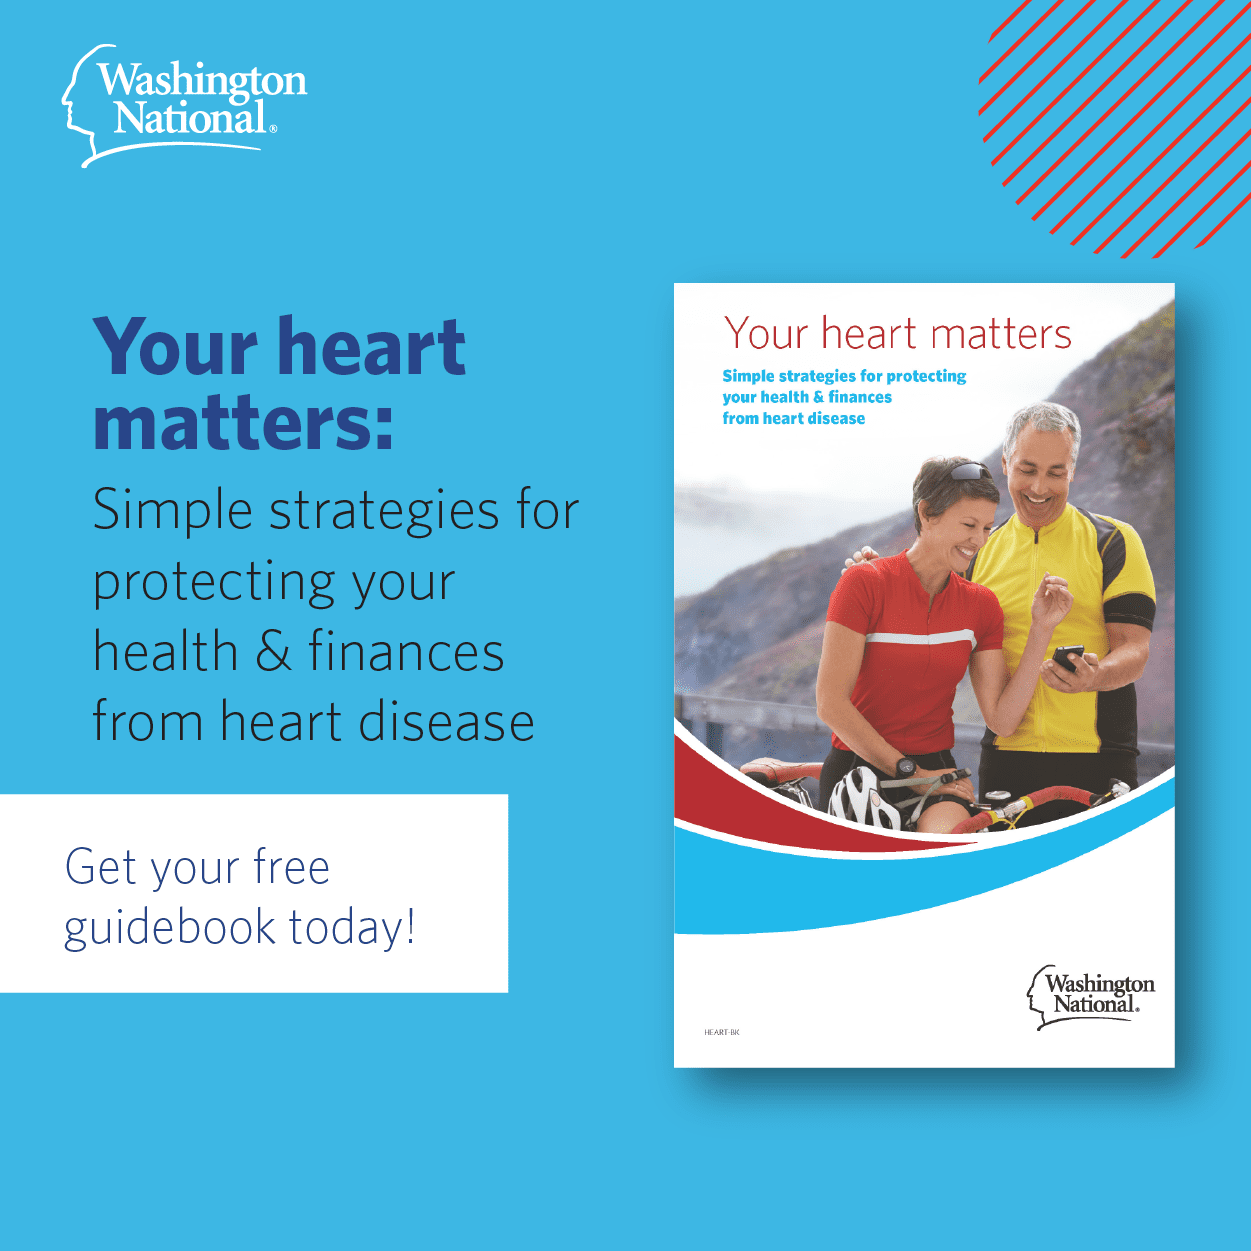 A downloadable guide to heart health.